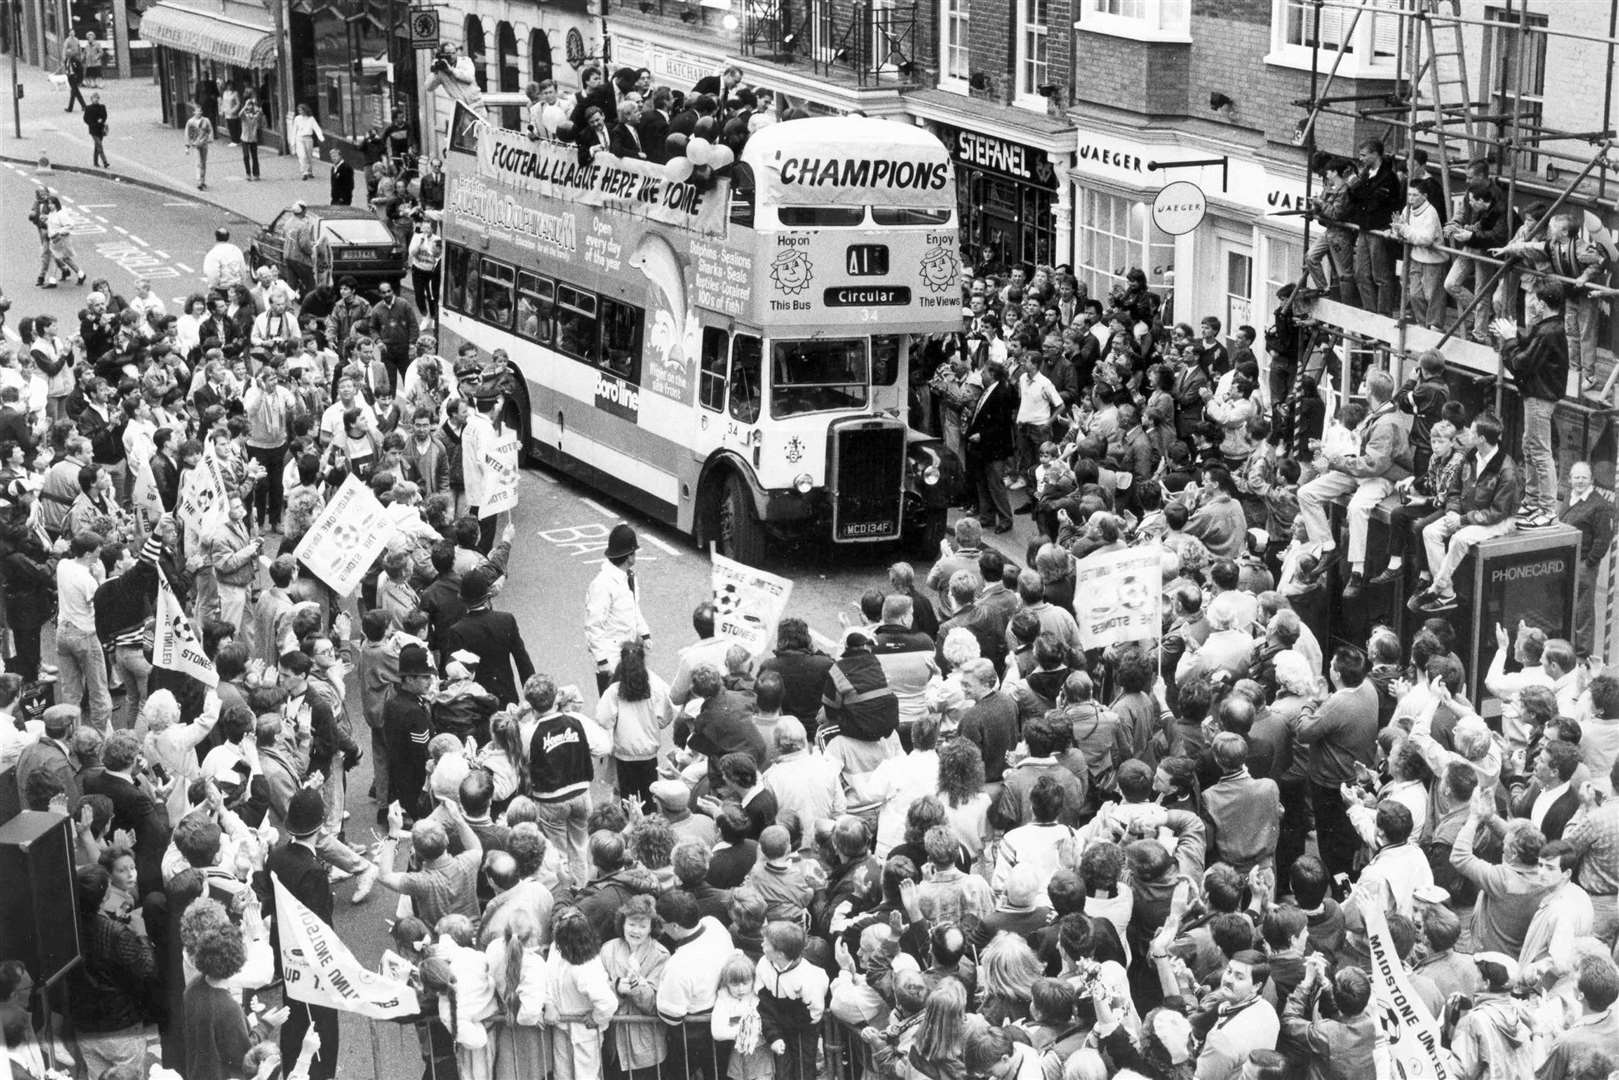 Hundreds of Maidstone United FC fans crowded the street to celebrate the teams promotion to the Football League in 1989